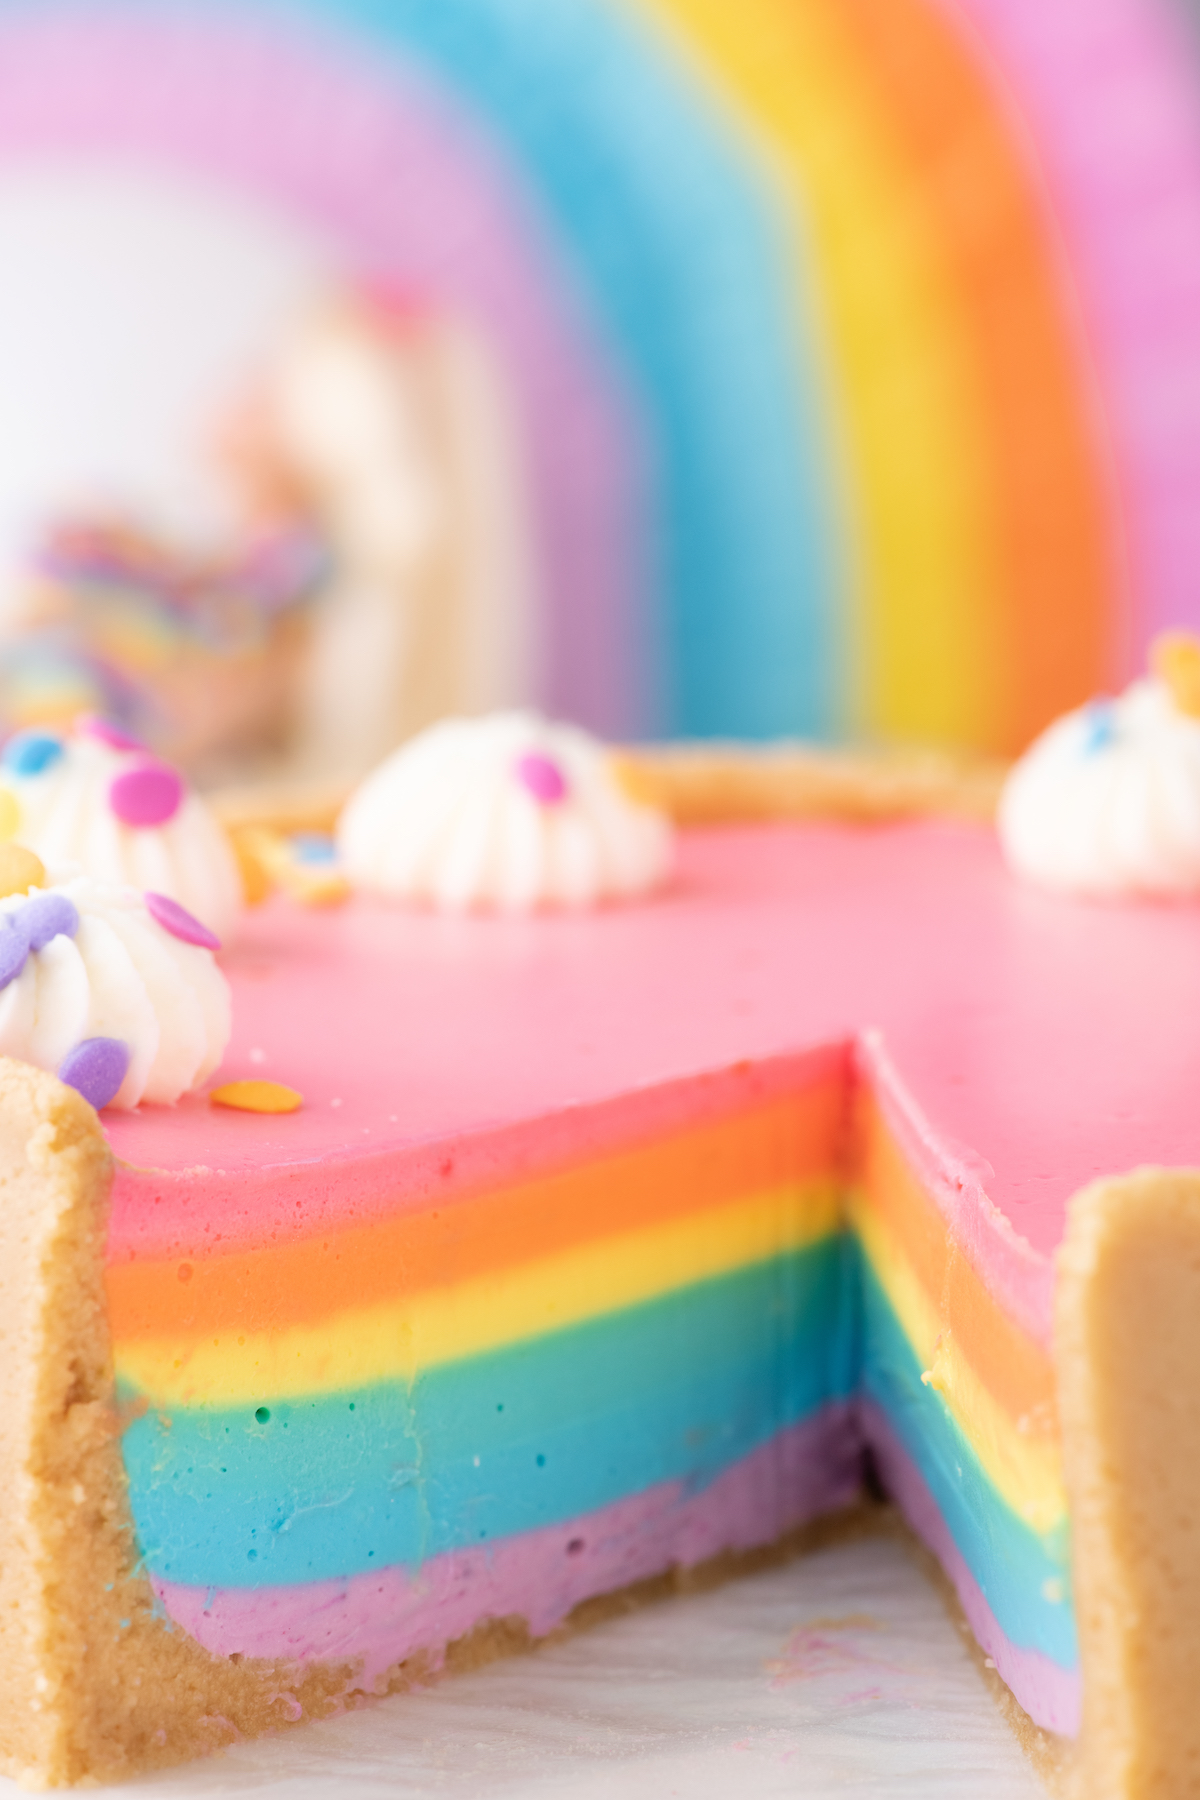 slice removed from rainbow cheesecake to reveal pretty colored layers